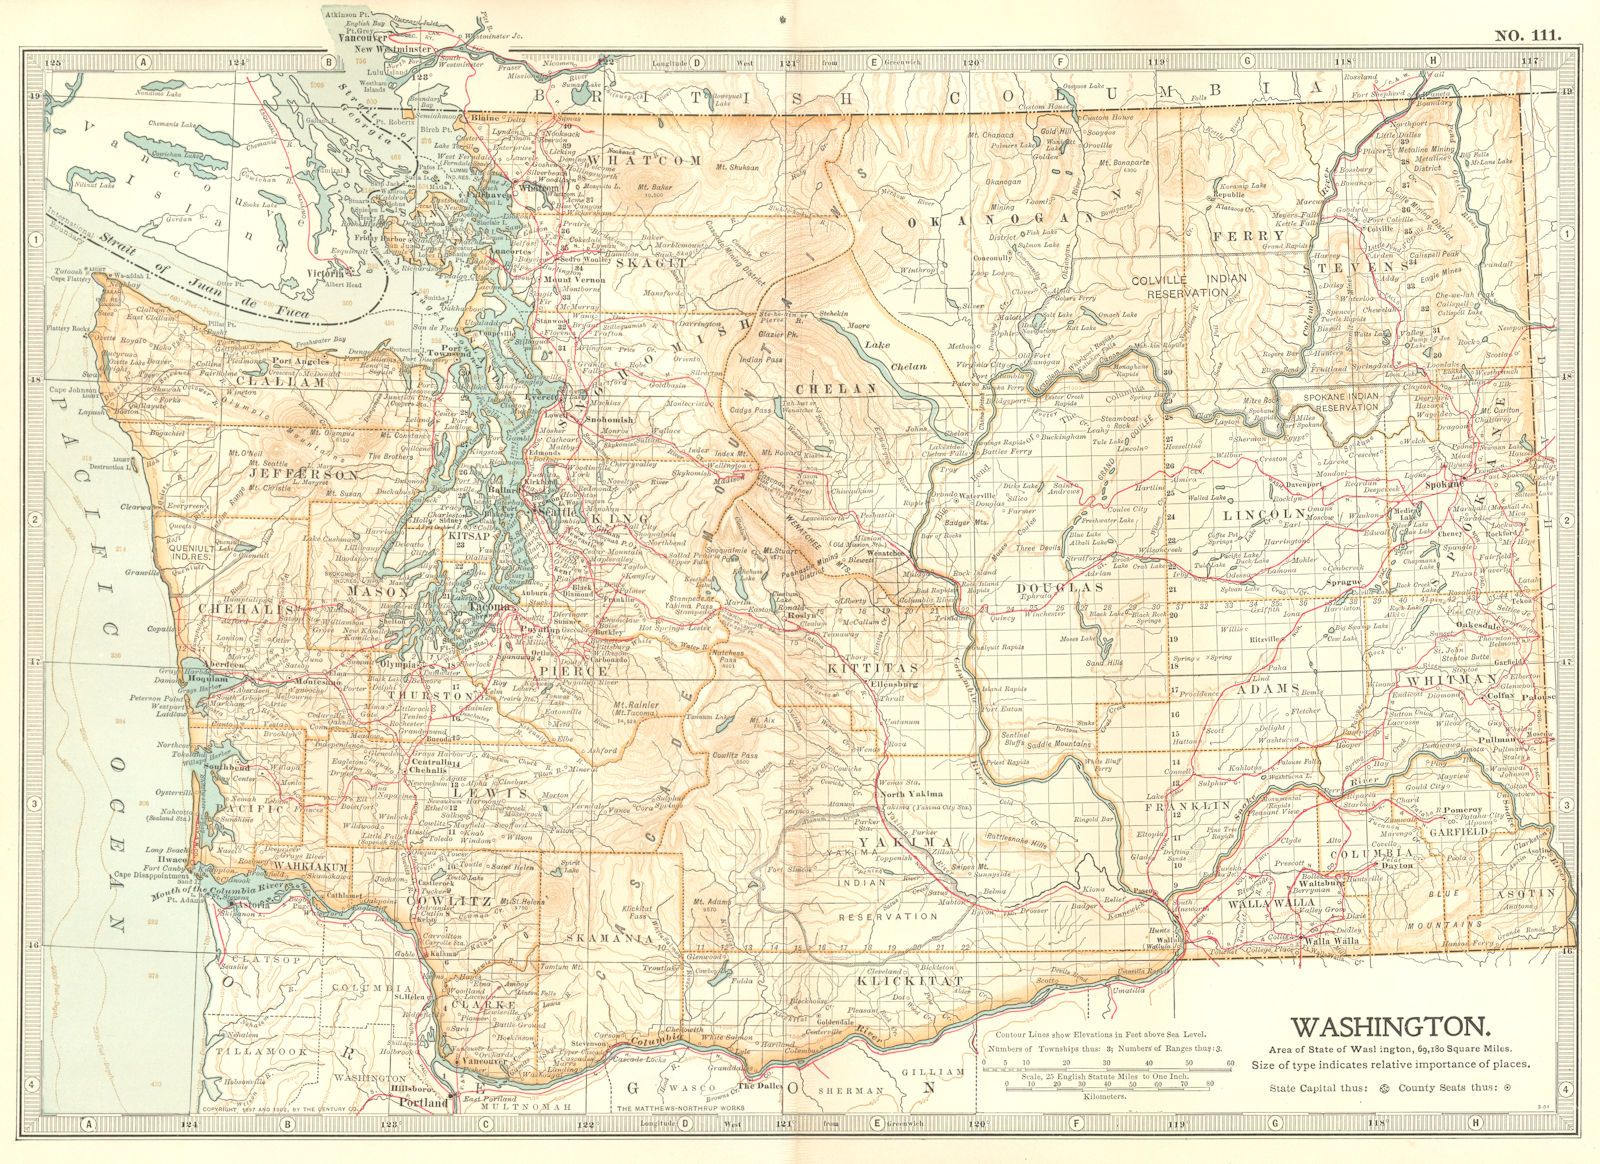 Associate Product WASHINGTON STATE. Showing counties & Indian reservations. Britannica 1903 map